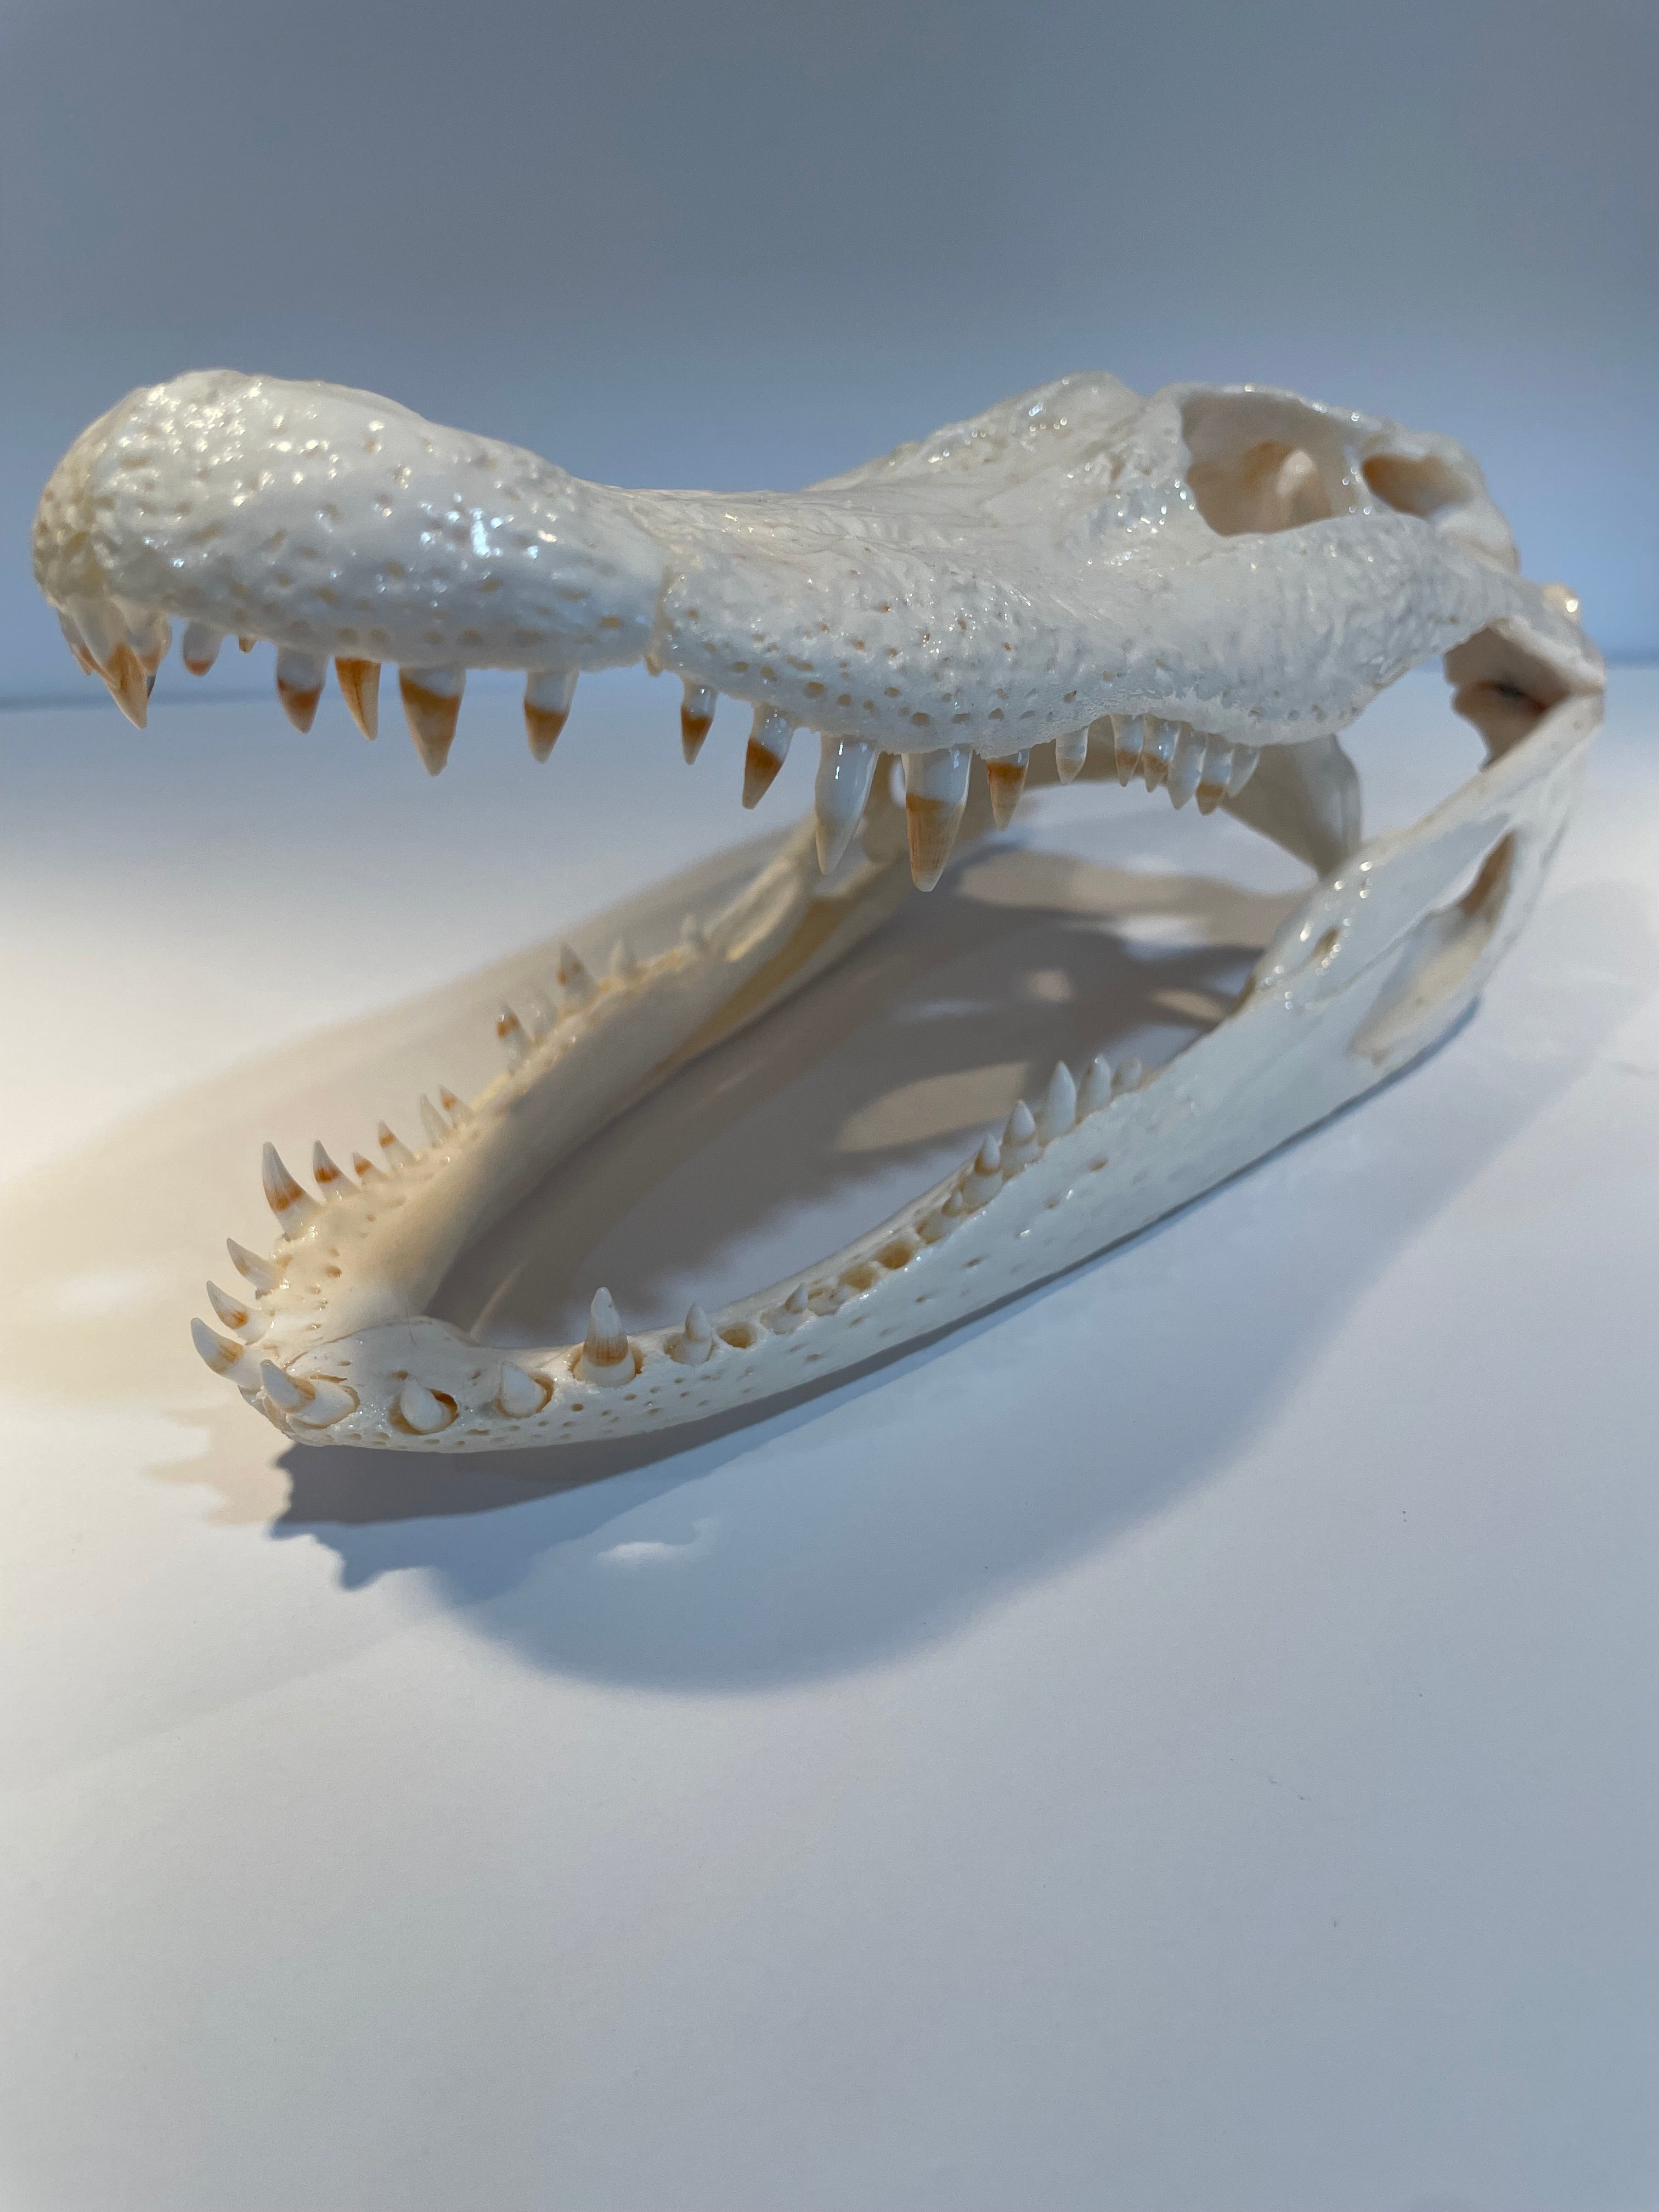 Alligator head white shiny finish with natural two-toned teeth 11x5x4.5